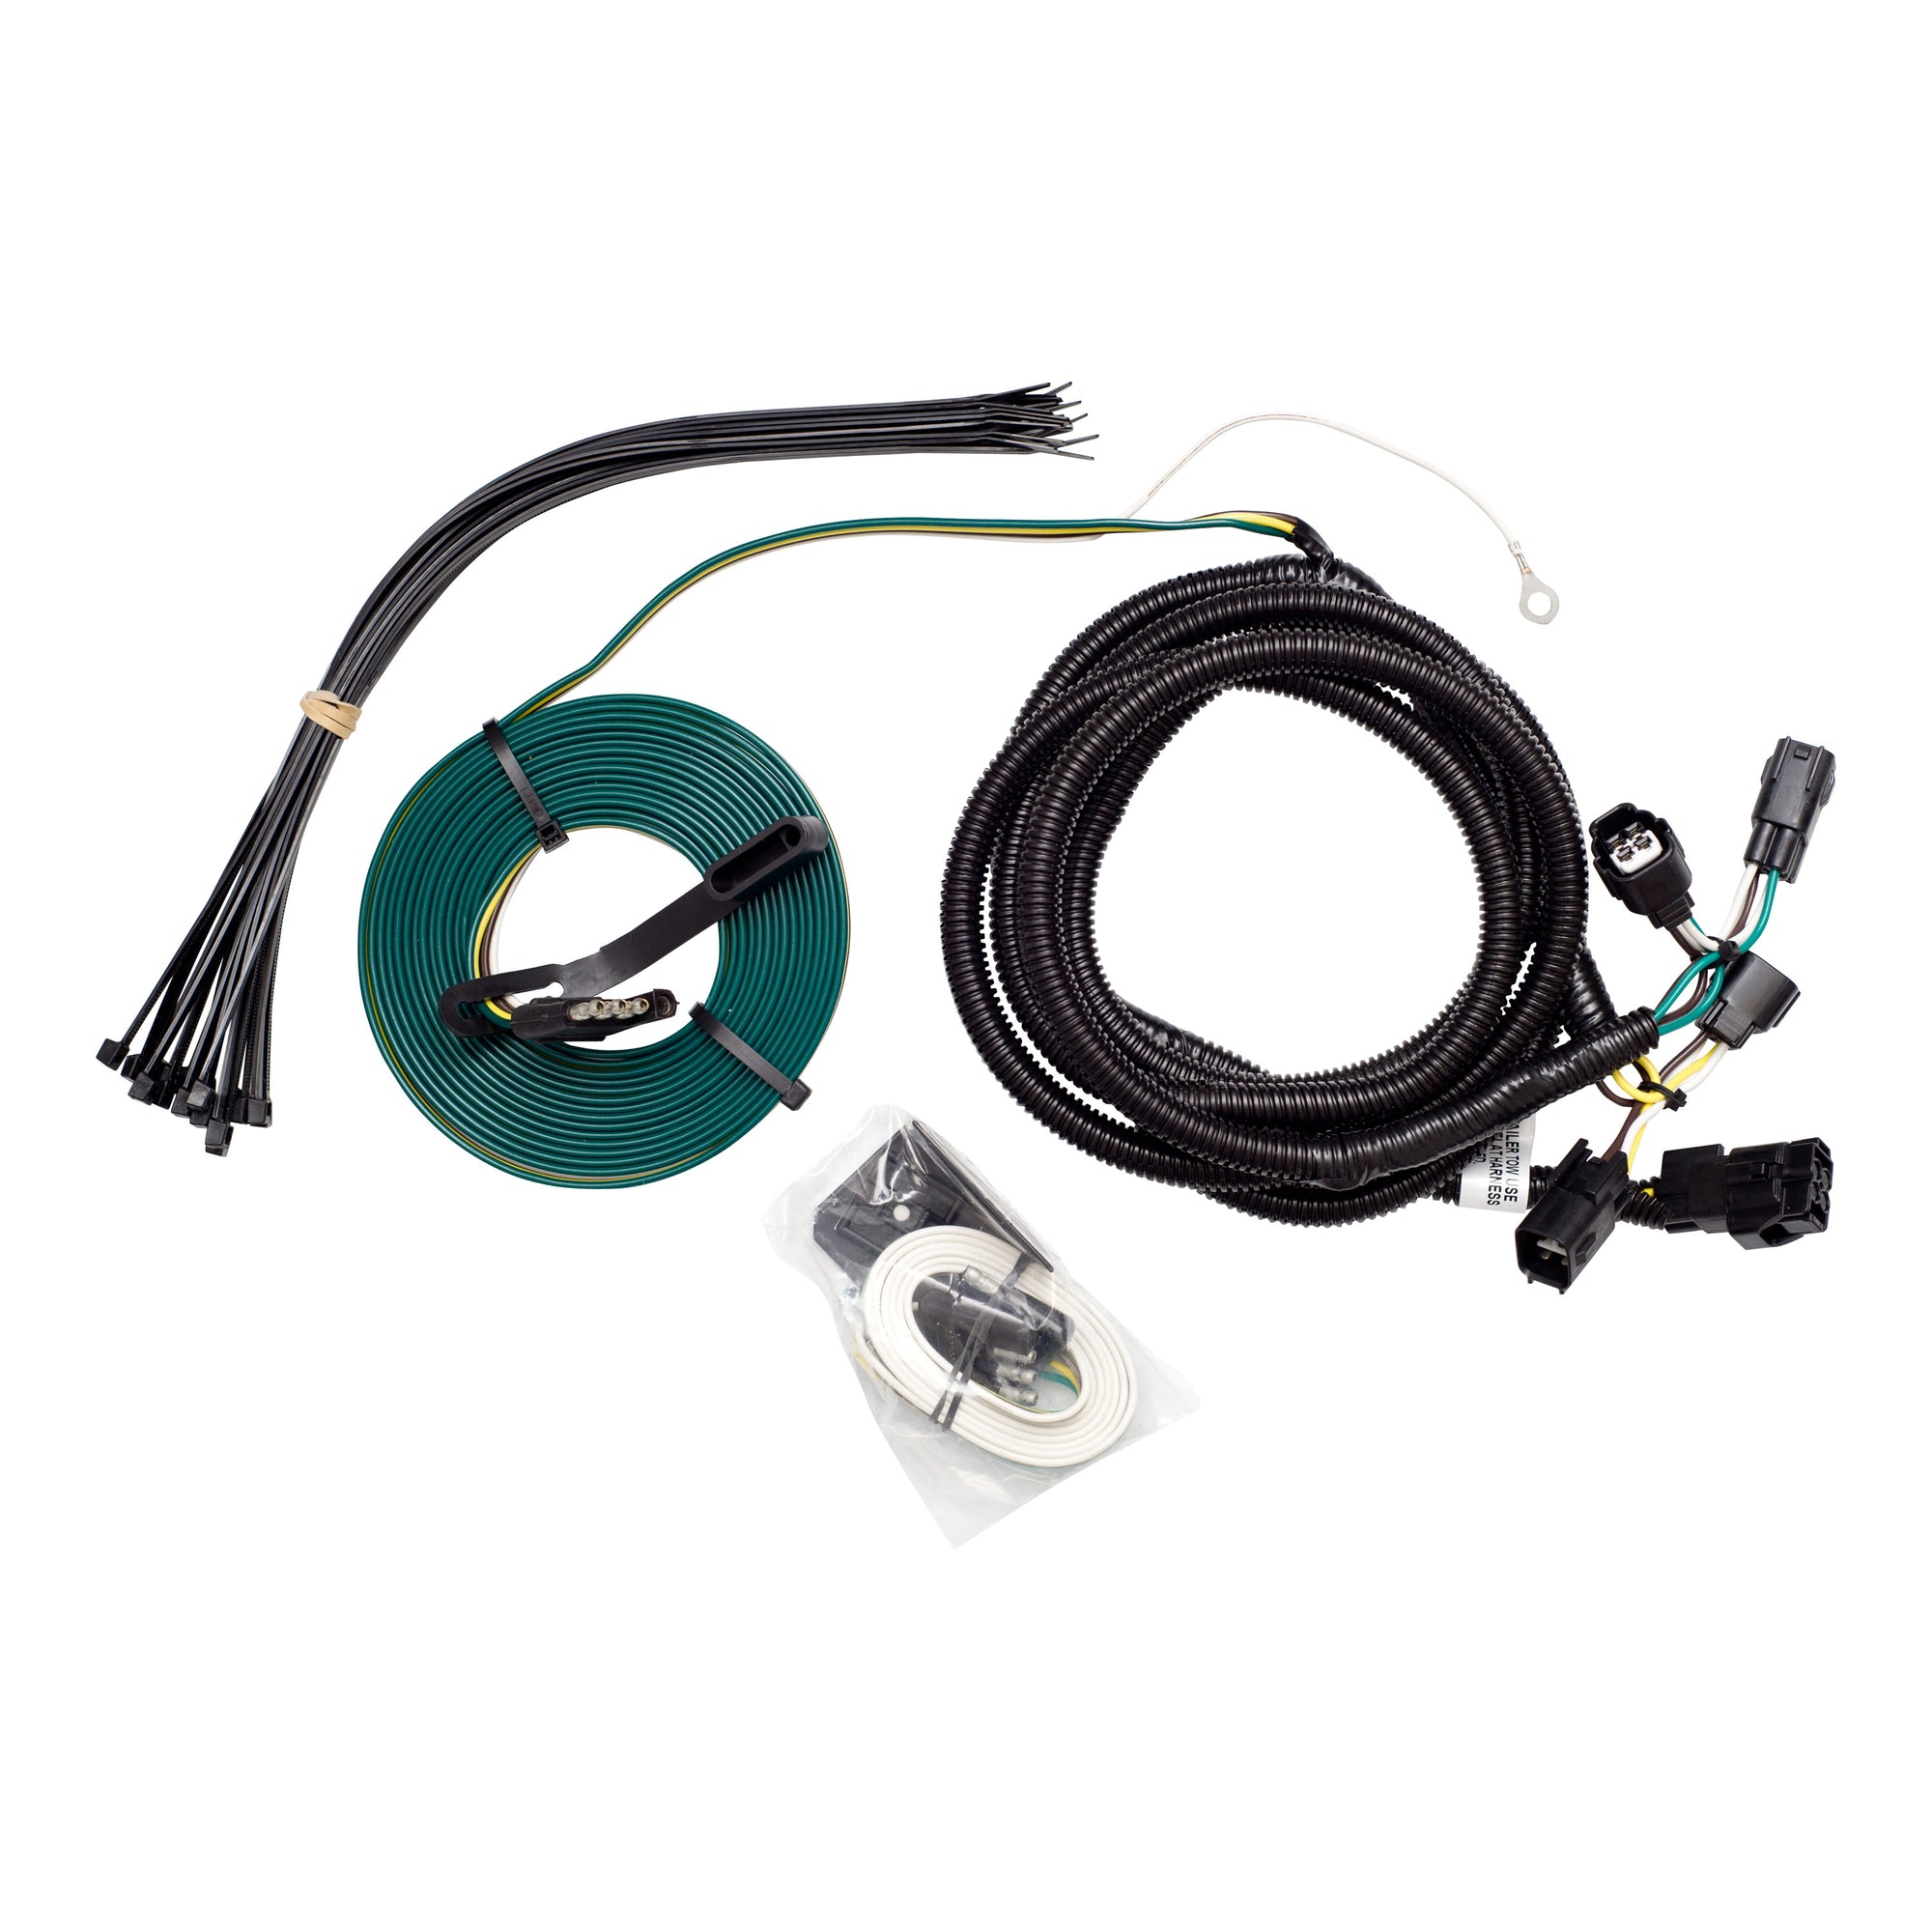 Demco 9523115 Towed Connector Vehicle Wiring Kit - For Jeep Grand Cherokee '14-'15